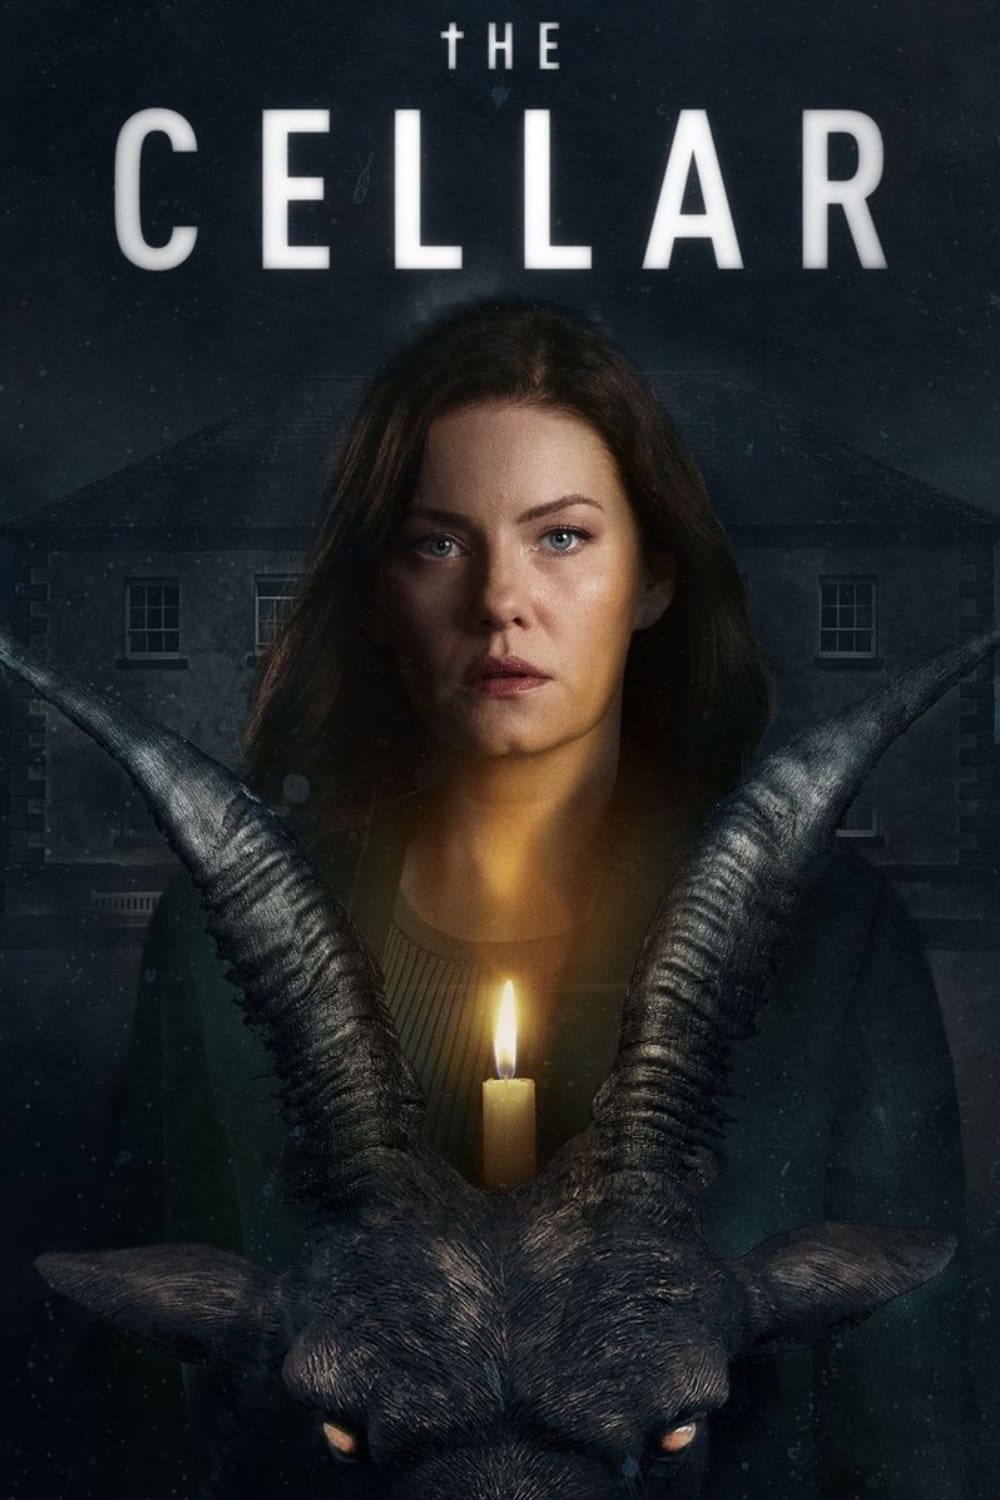 Poster for the movie "The Cellar"